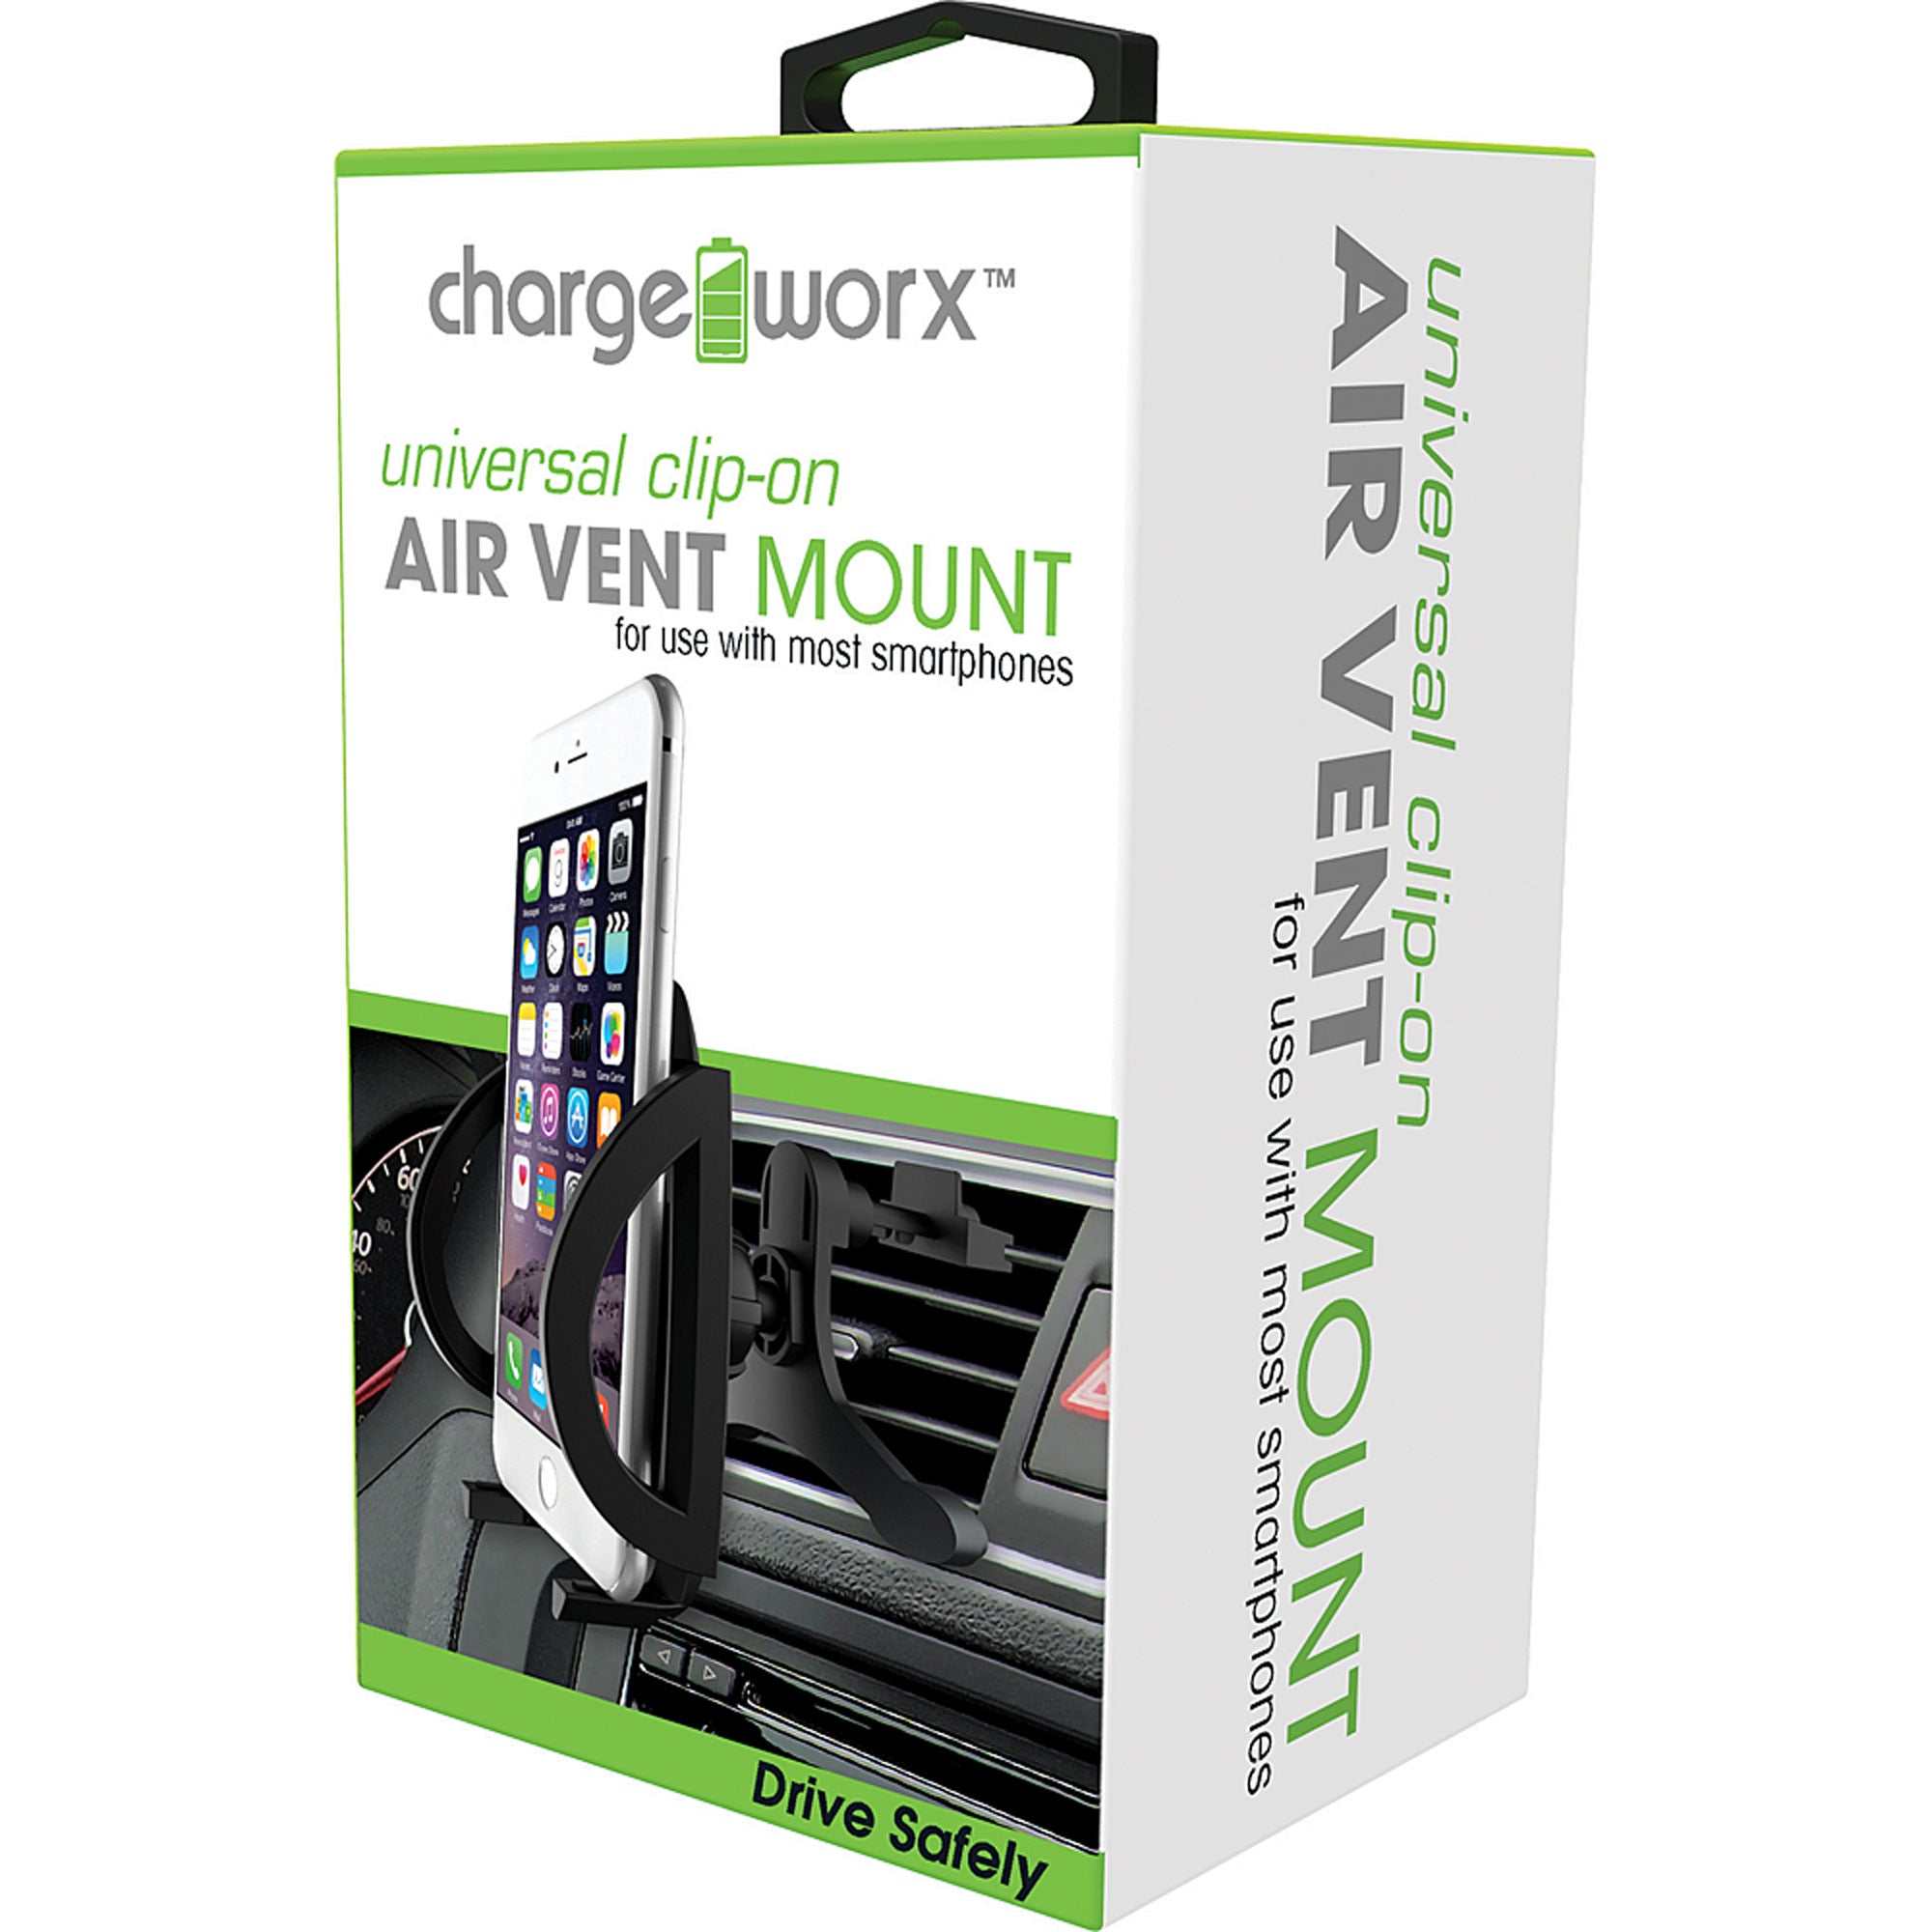 Chargeworx Universal Clip-on Air Vent Swivel Mount